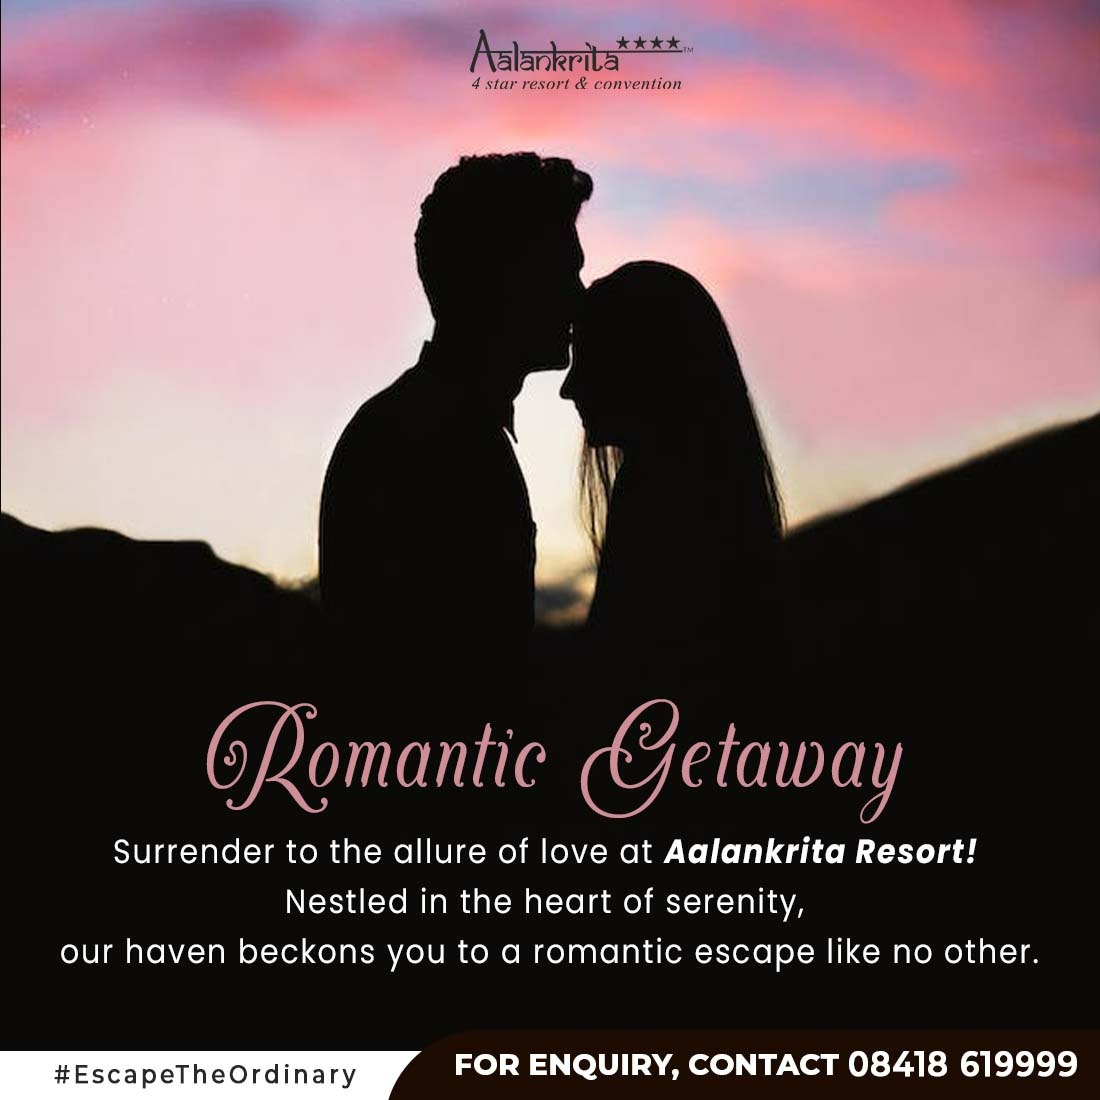 ✨ Escape reality for a dreamy rendezvous at Aalankrita Resort! 💑
Let Aalankrita Resort be the canvas for your love story!Imagine waking up to the gentle rustle of leaves and sharing a sunrise breakfast overlooking picturesque landscapes. #EscapeToParadise #AalankritaRomance💟